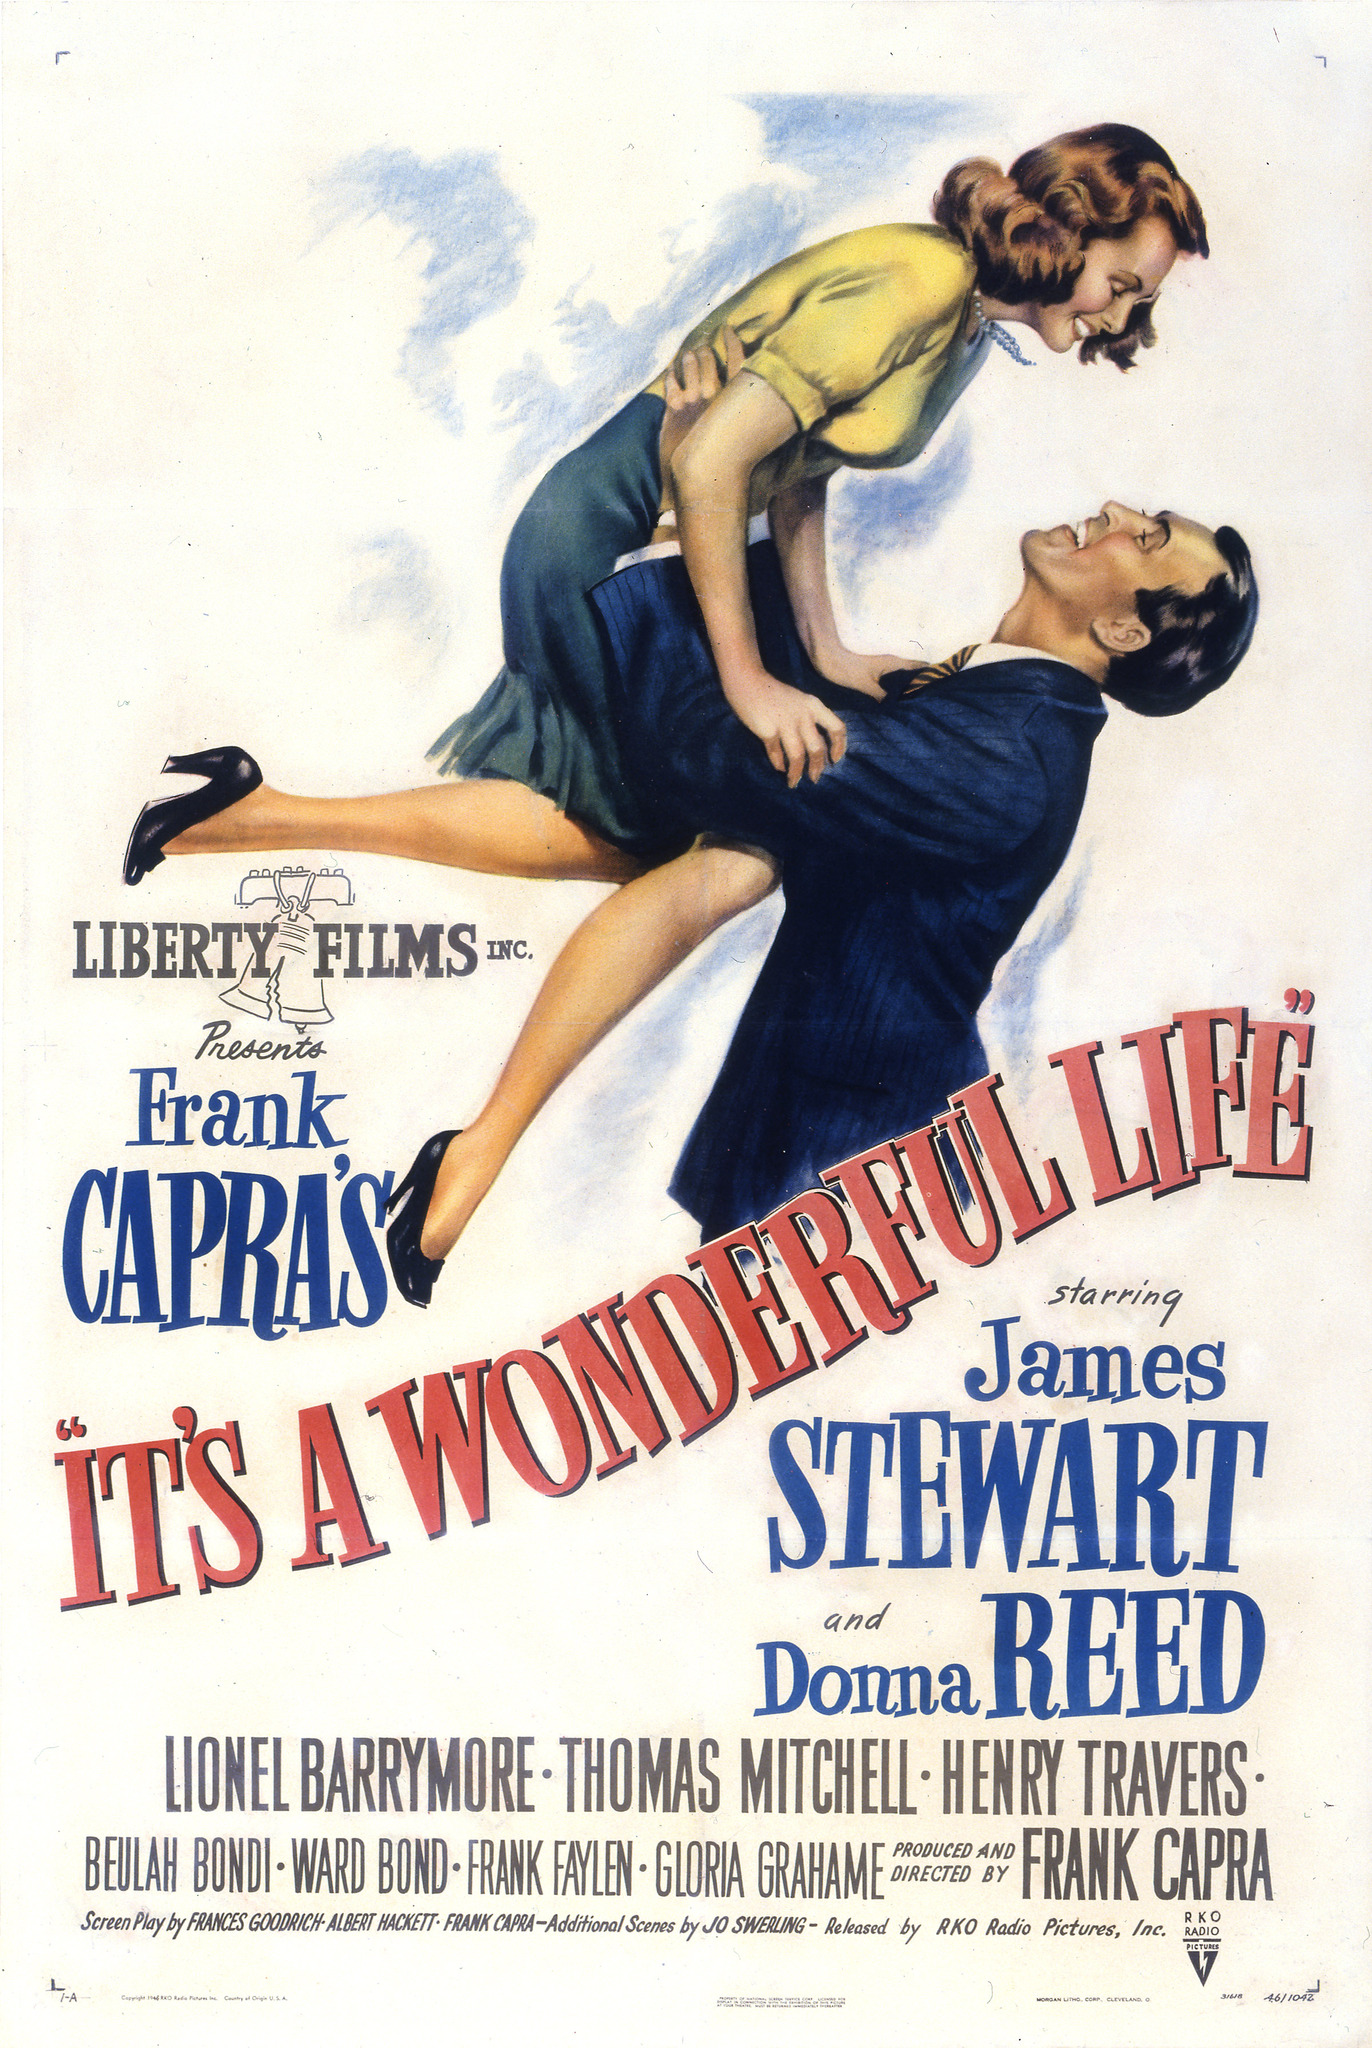 The Academy of Motion Picture Arts and Sciences will examine the technology behind "It's a Wonderful Life" at Los Angeles and New York City screenings on Friday, December 9, and Monday, December 12, respectively.